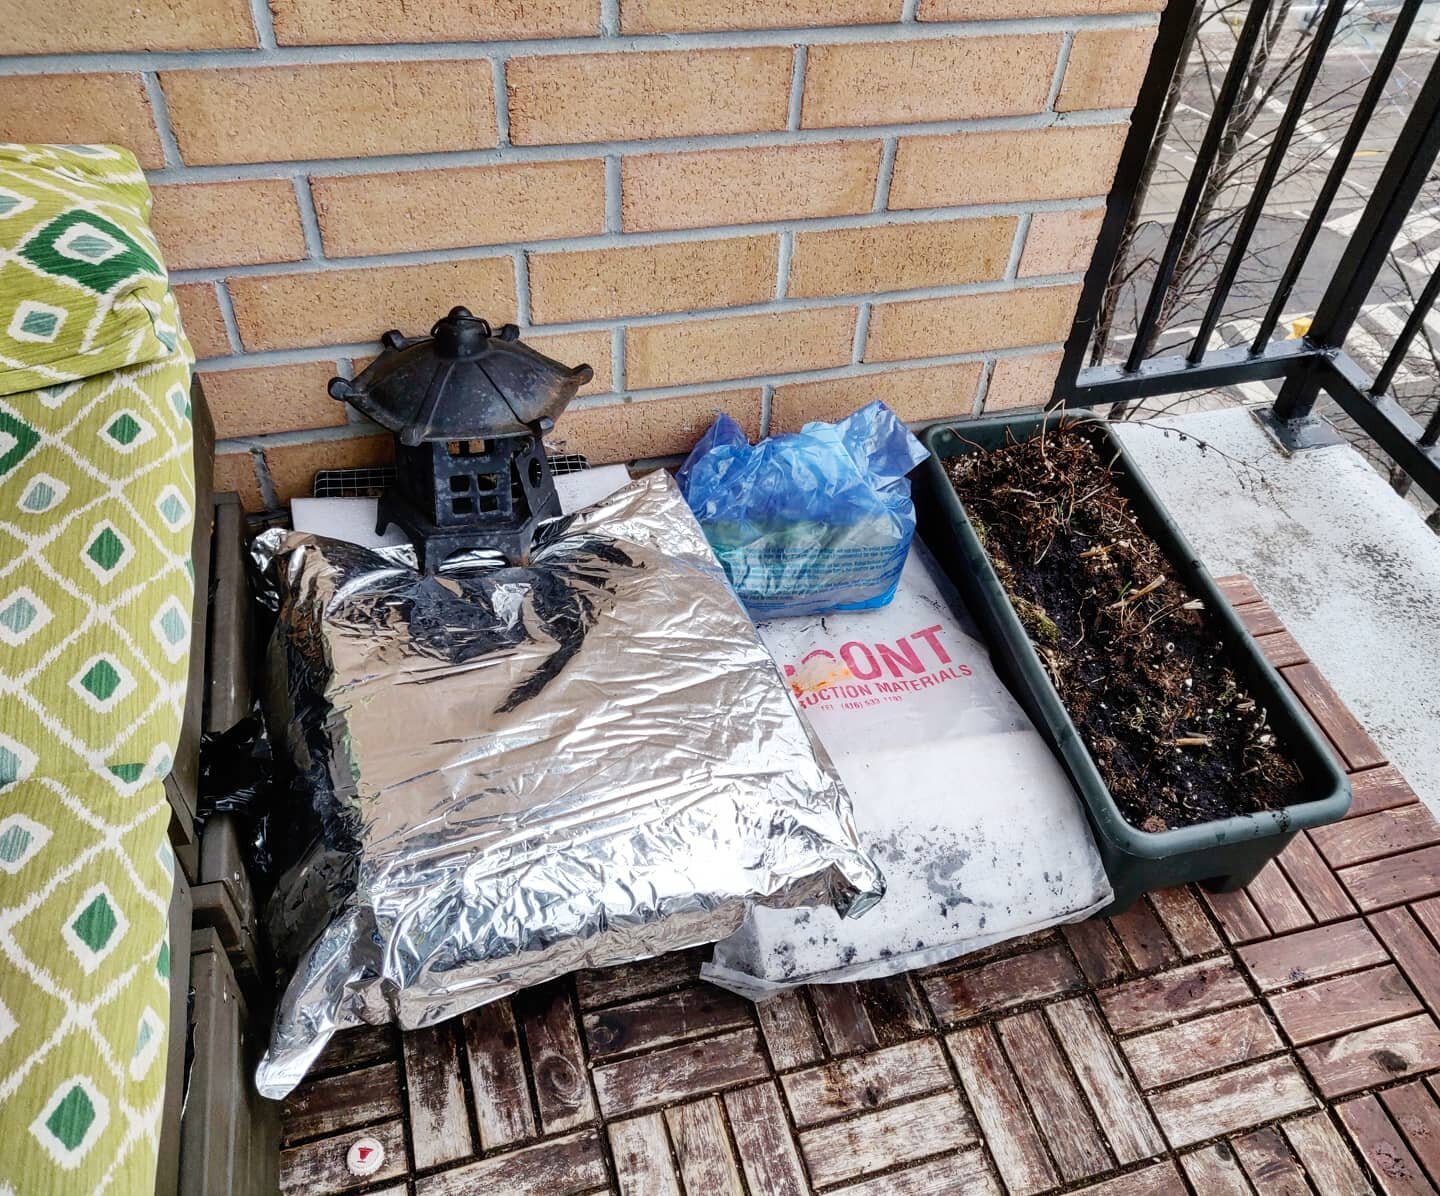 Let's call it the Balcony Seed Stratification Laboratory. Four different treatments, a dozen species of native plants, all using cheap and easy to find materials (mostly stuff I had lying around). So far all I've done is check on the soil moisture  a